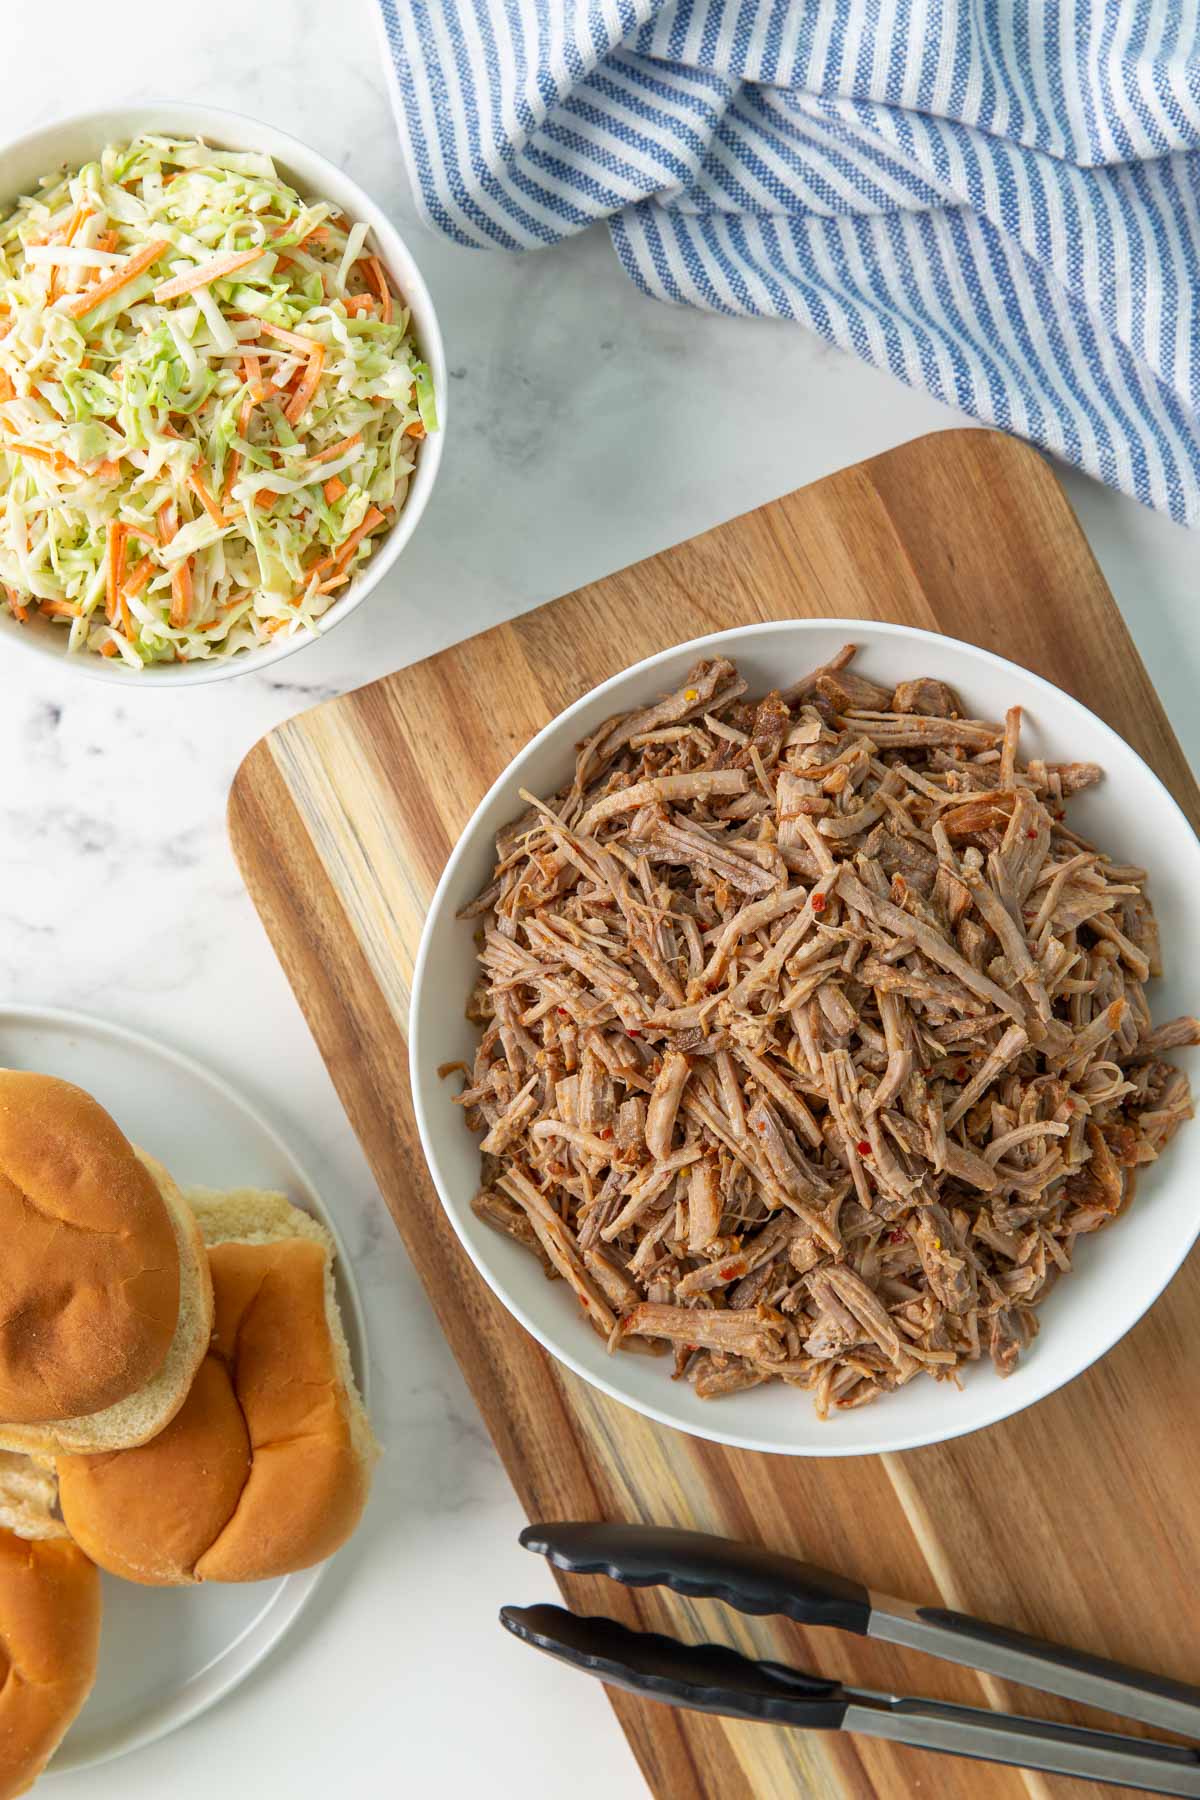 A bowl of pulled pork, a bowl of coleslaw and a plate with sandwich buns.